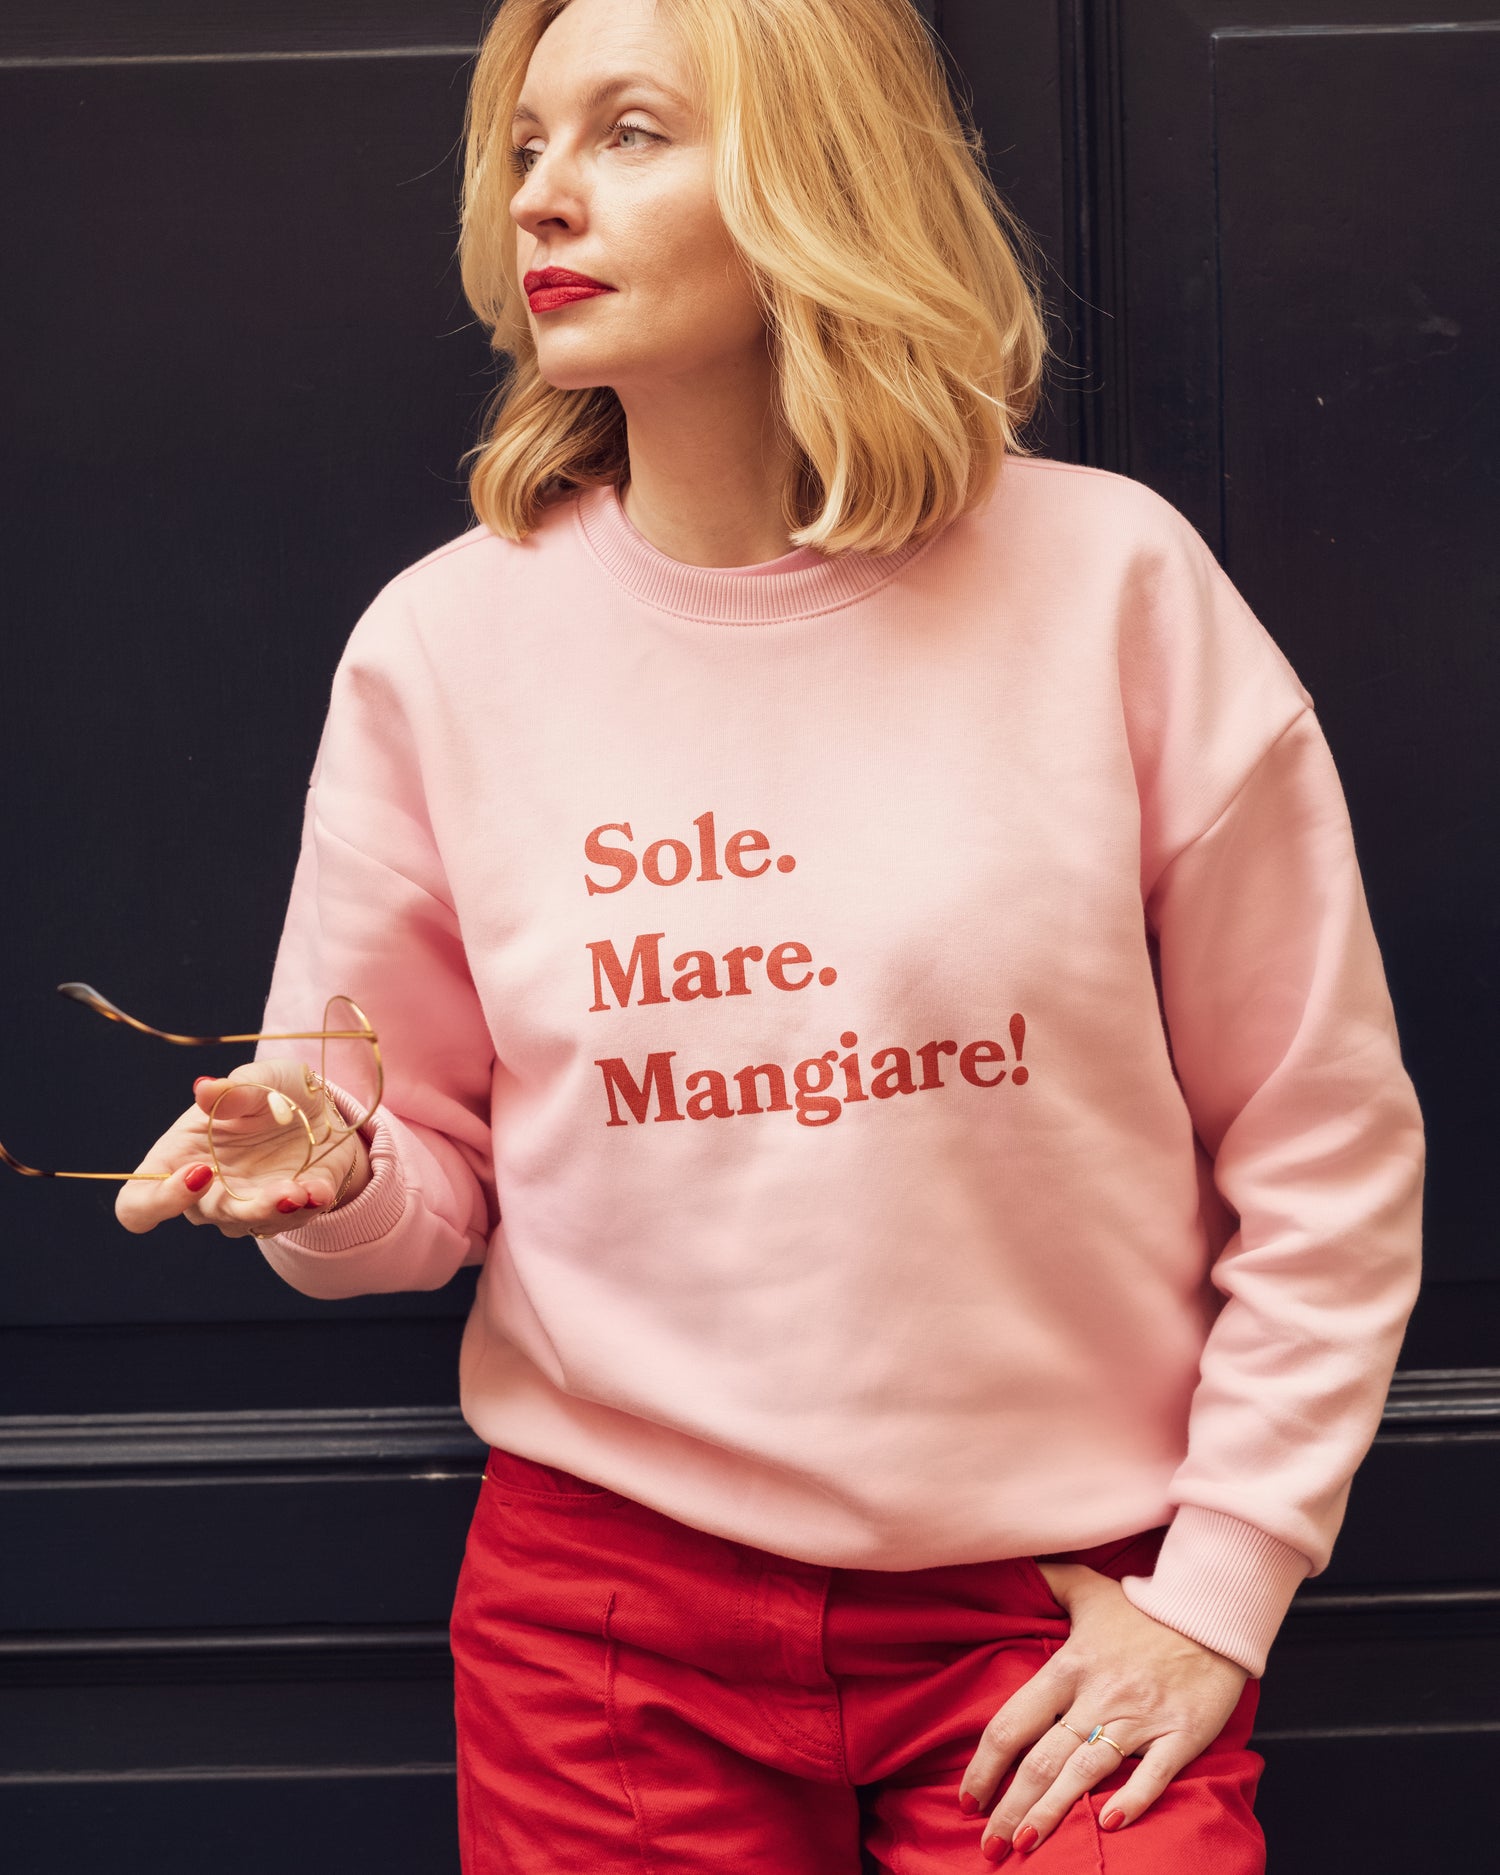 Pink sweatshirt Sole Mare Mangiare. For foodie lover. More pasta less drama vibe.